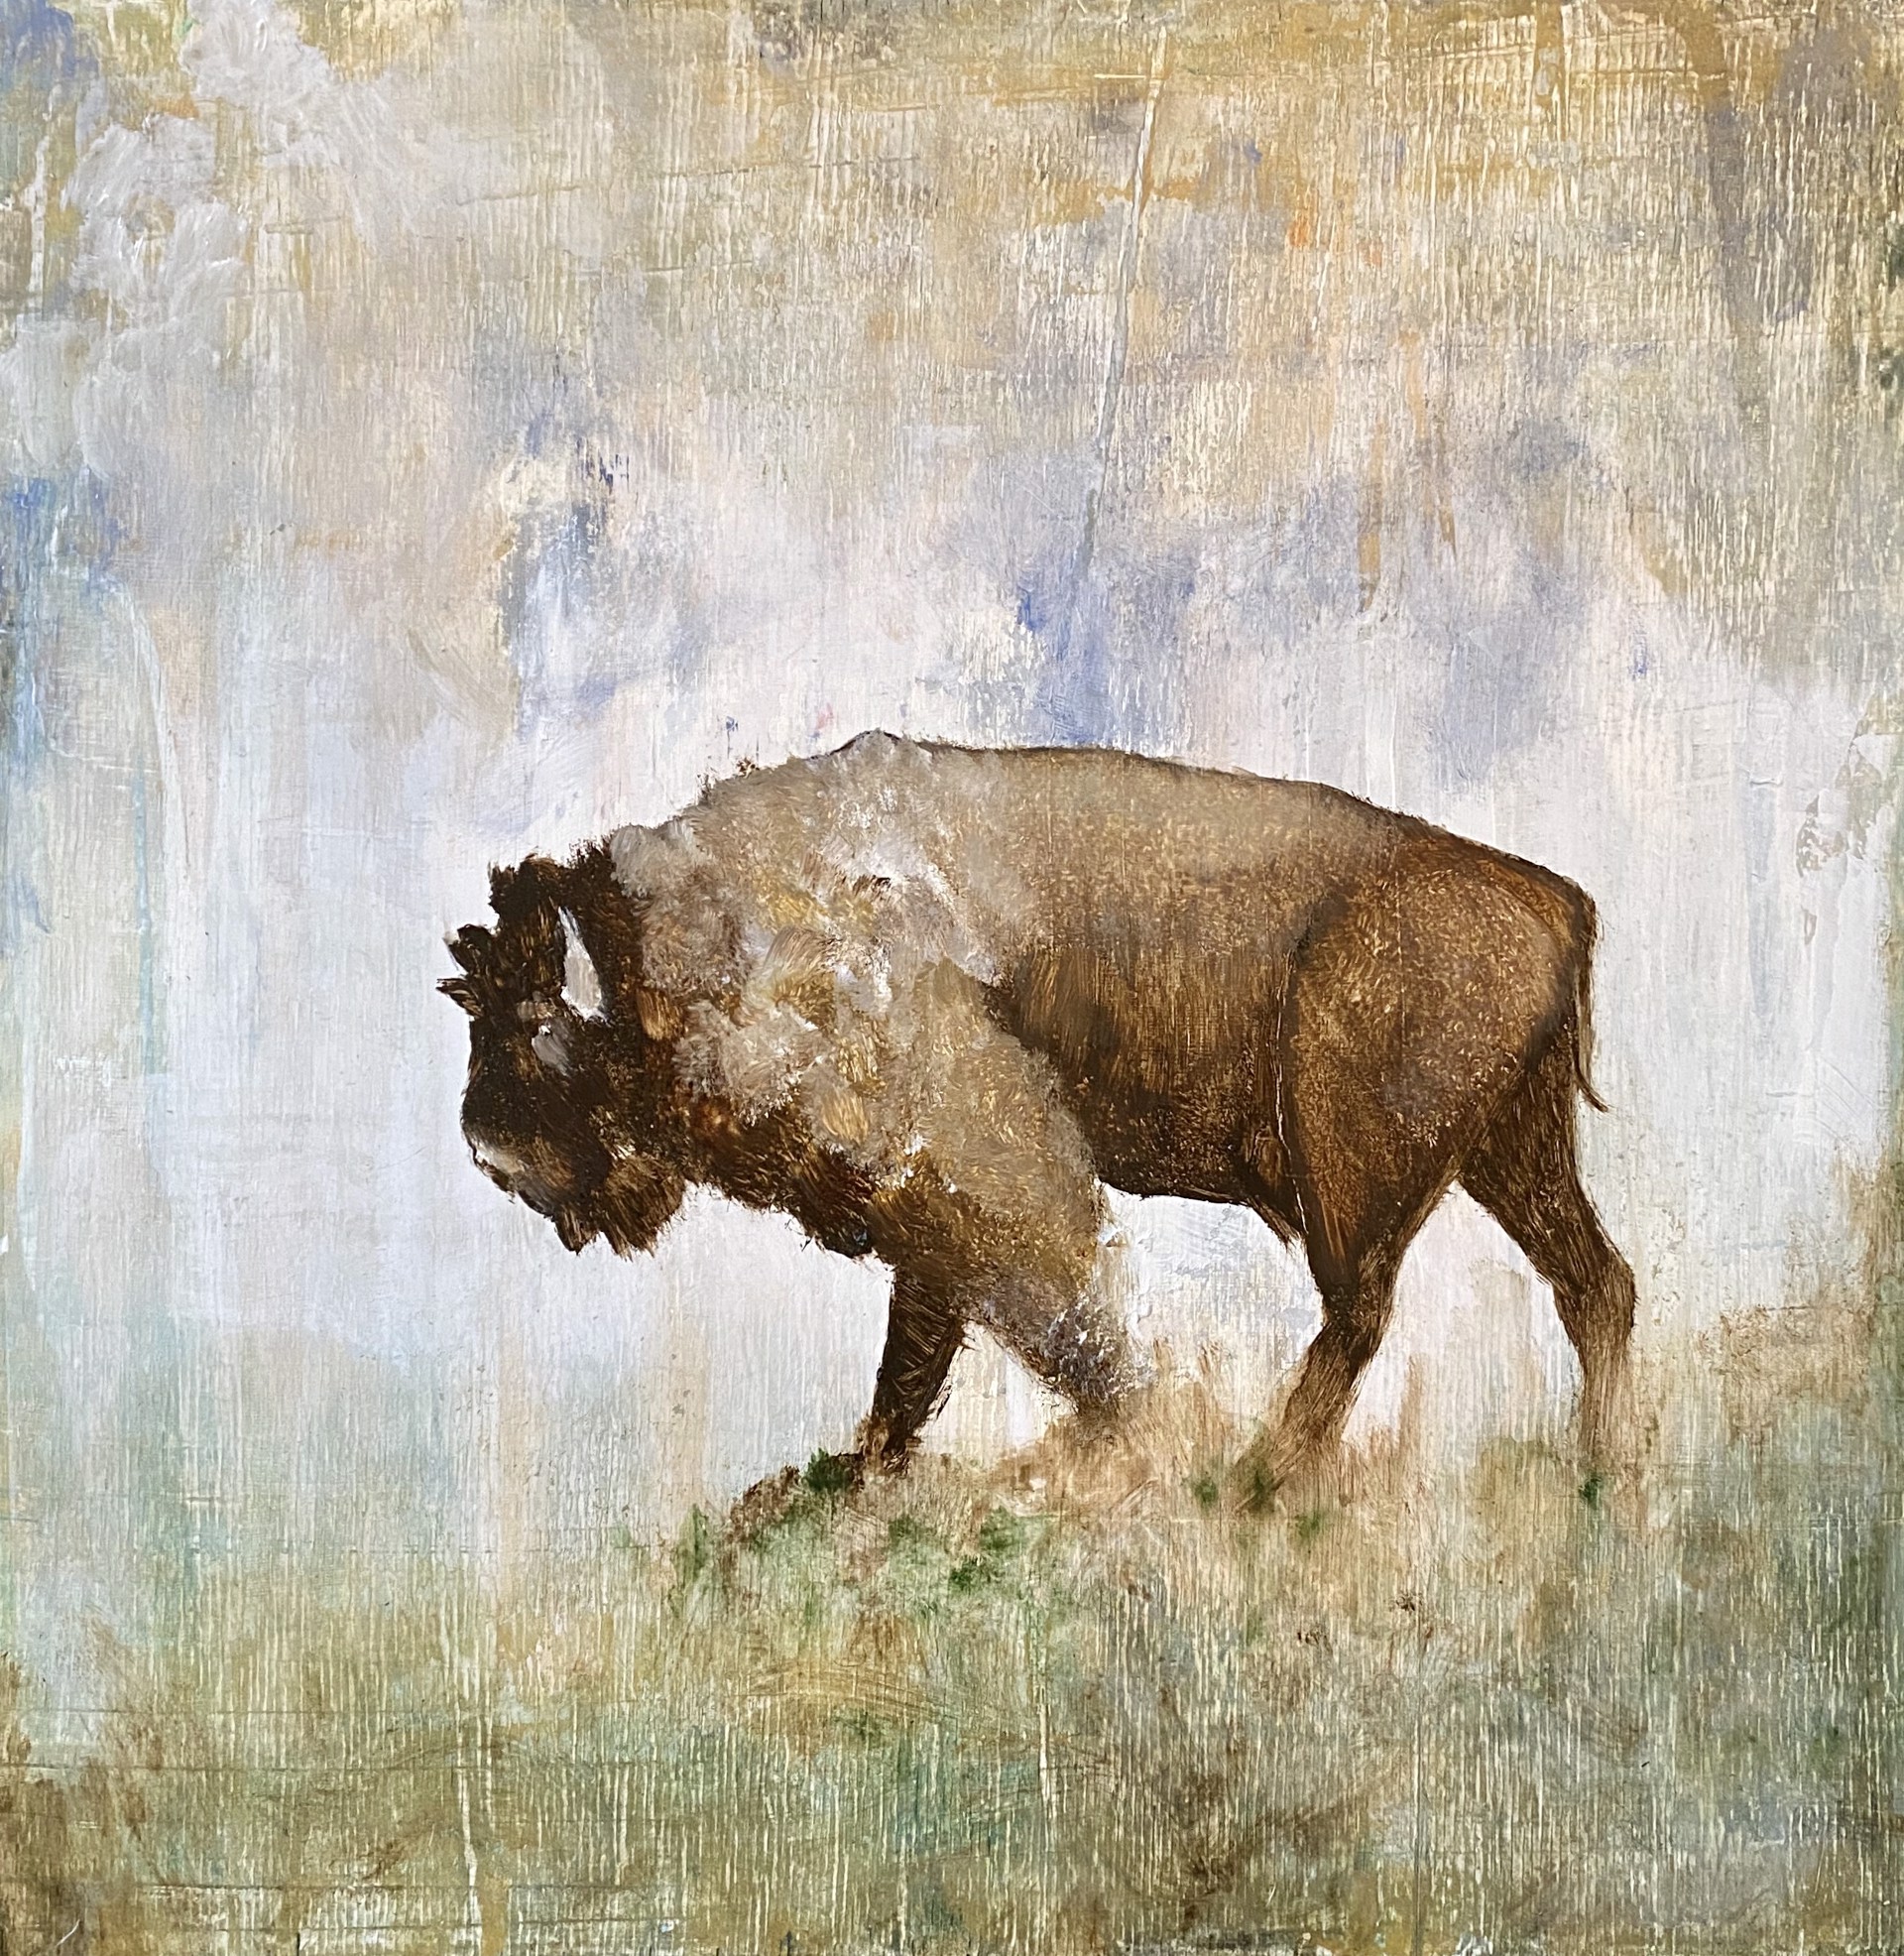 Original Oil Painting Of A Bison Walking In A Contemporary Landscape And Abstract Background, By Jenna Von Benedikt